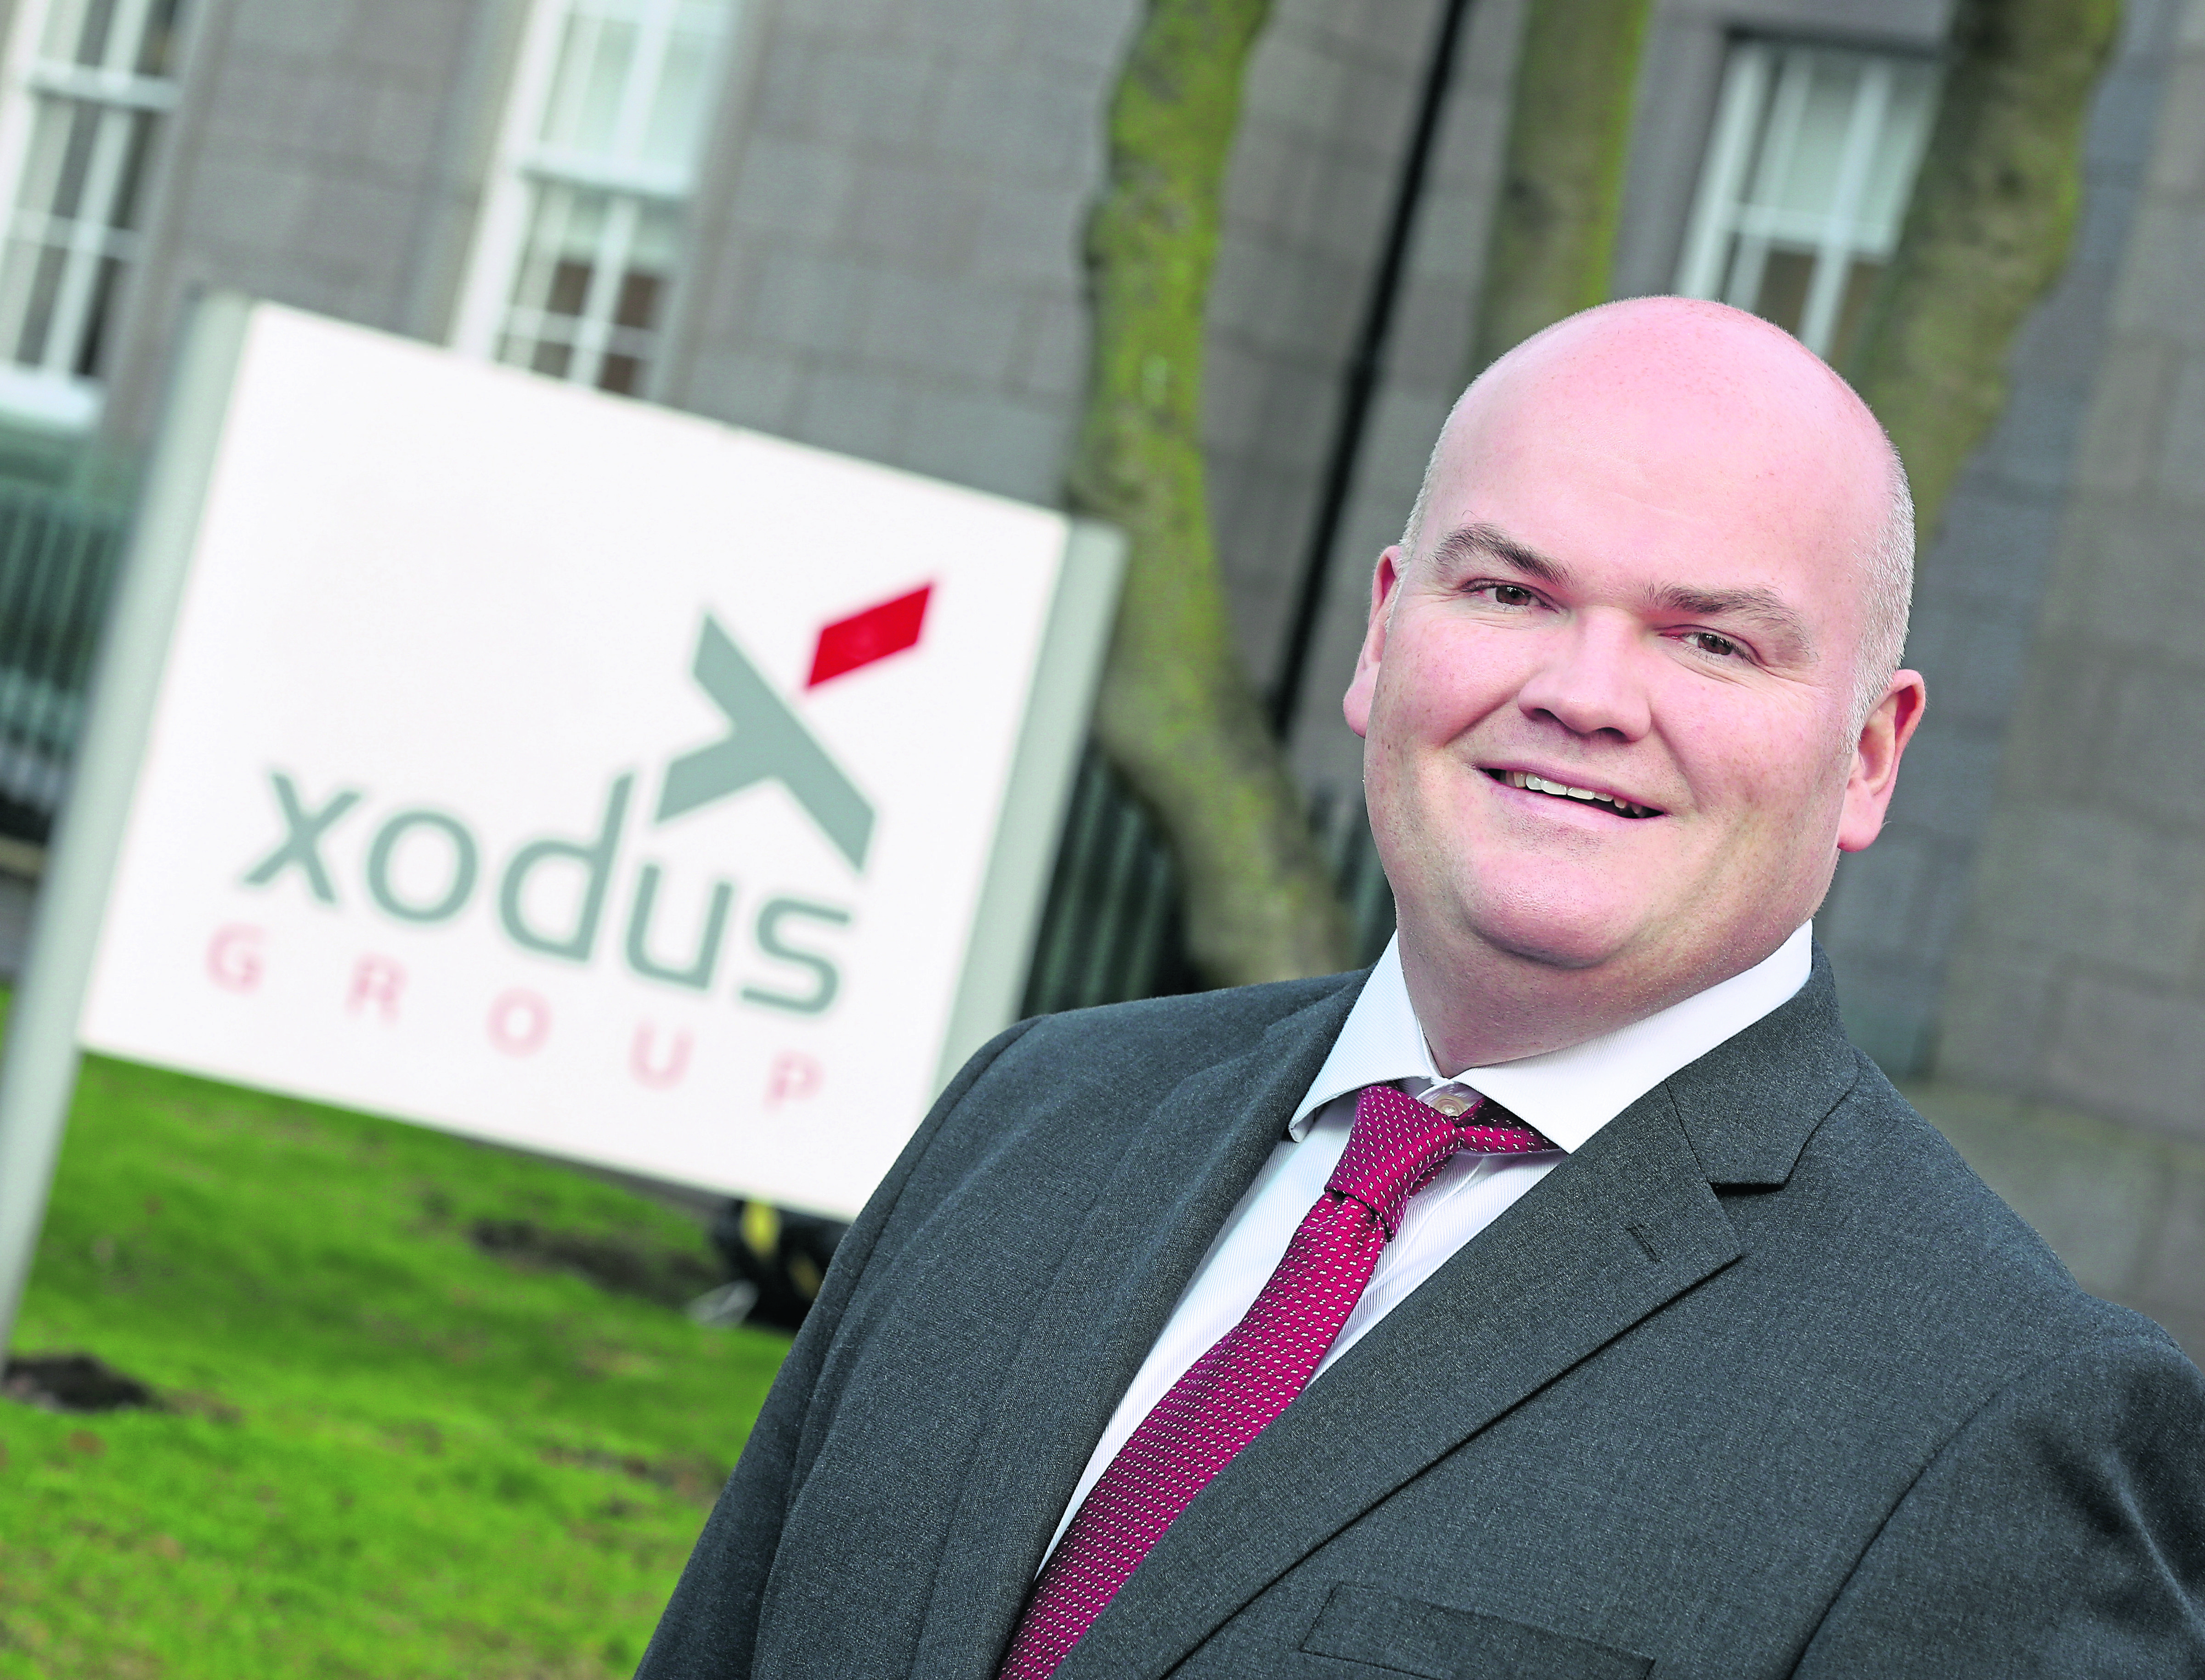 Andrew Wylie at Xodus says the company has increased headcount as it anticipates a rosy future